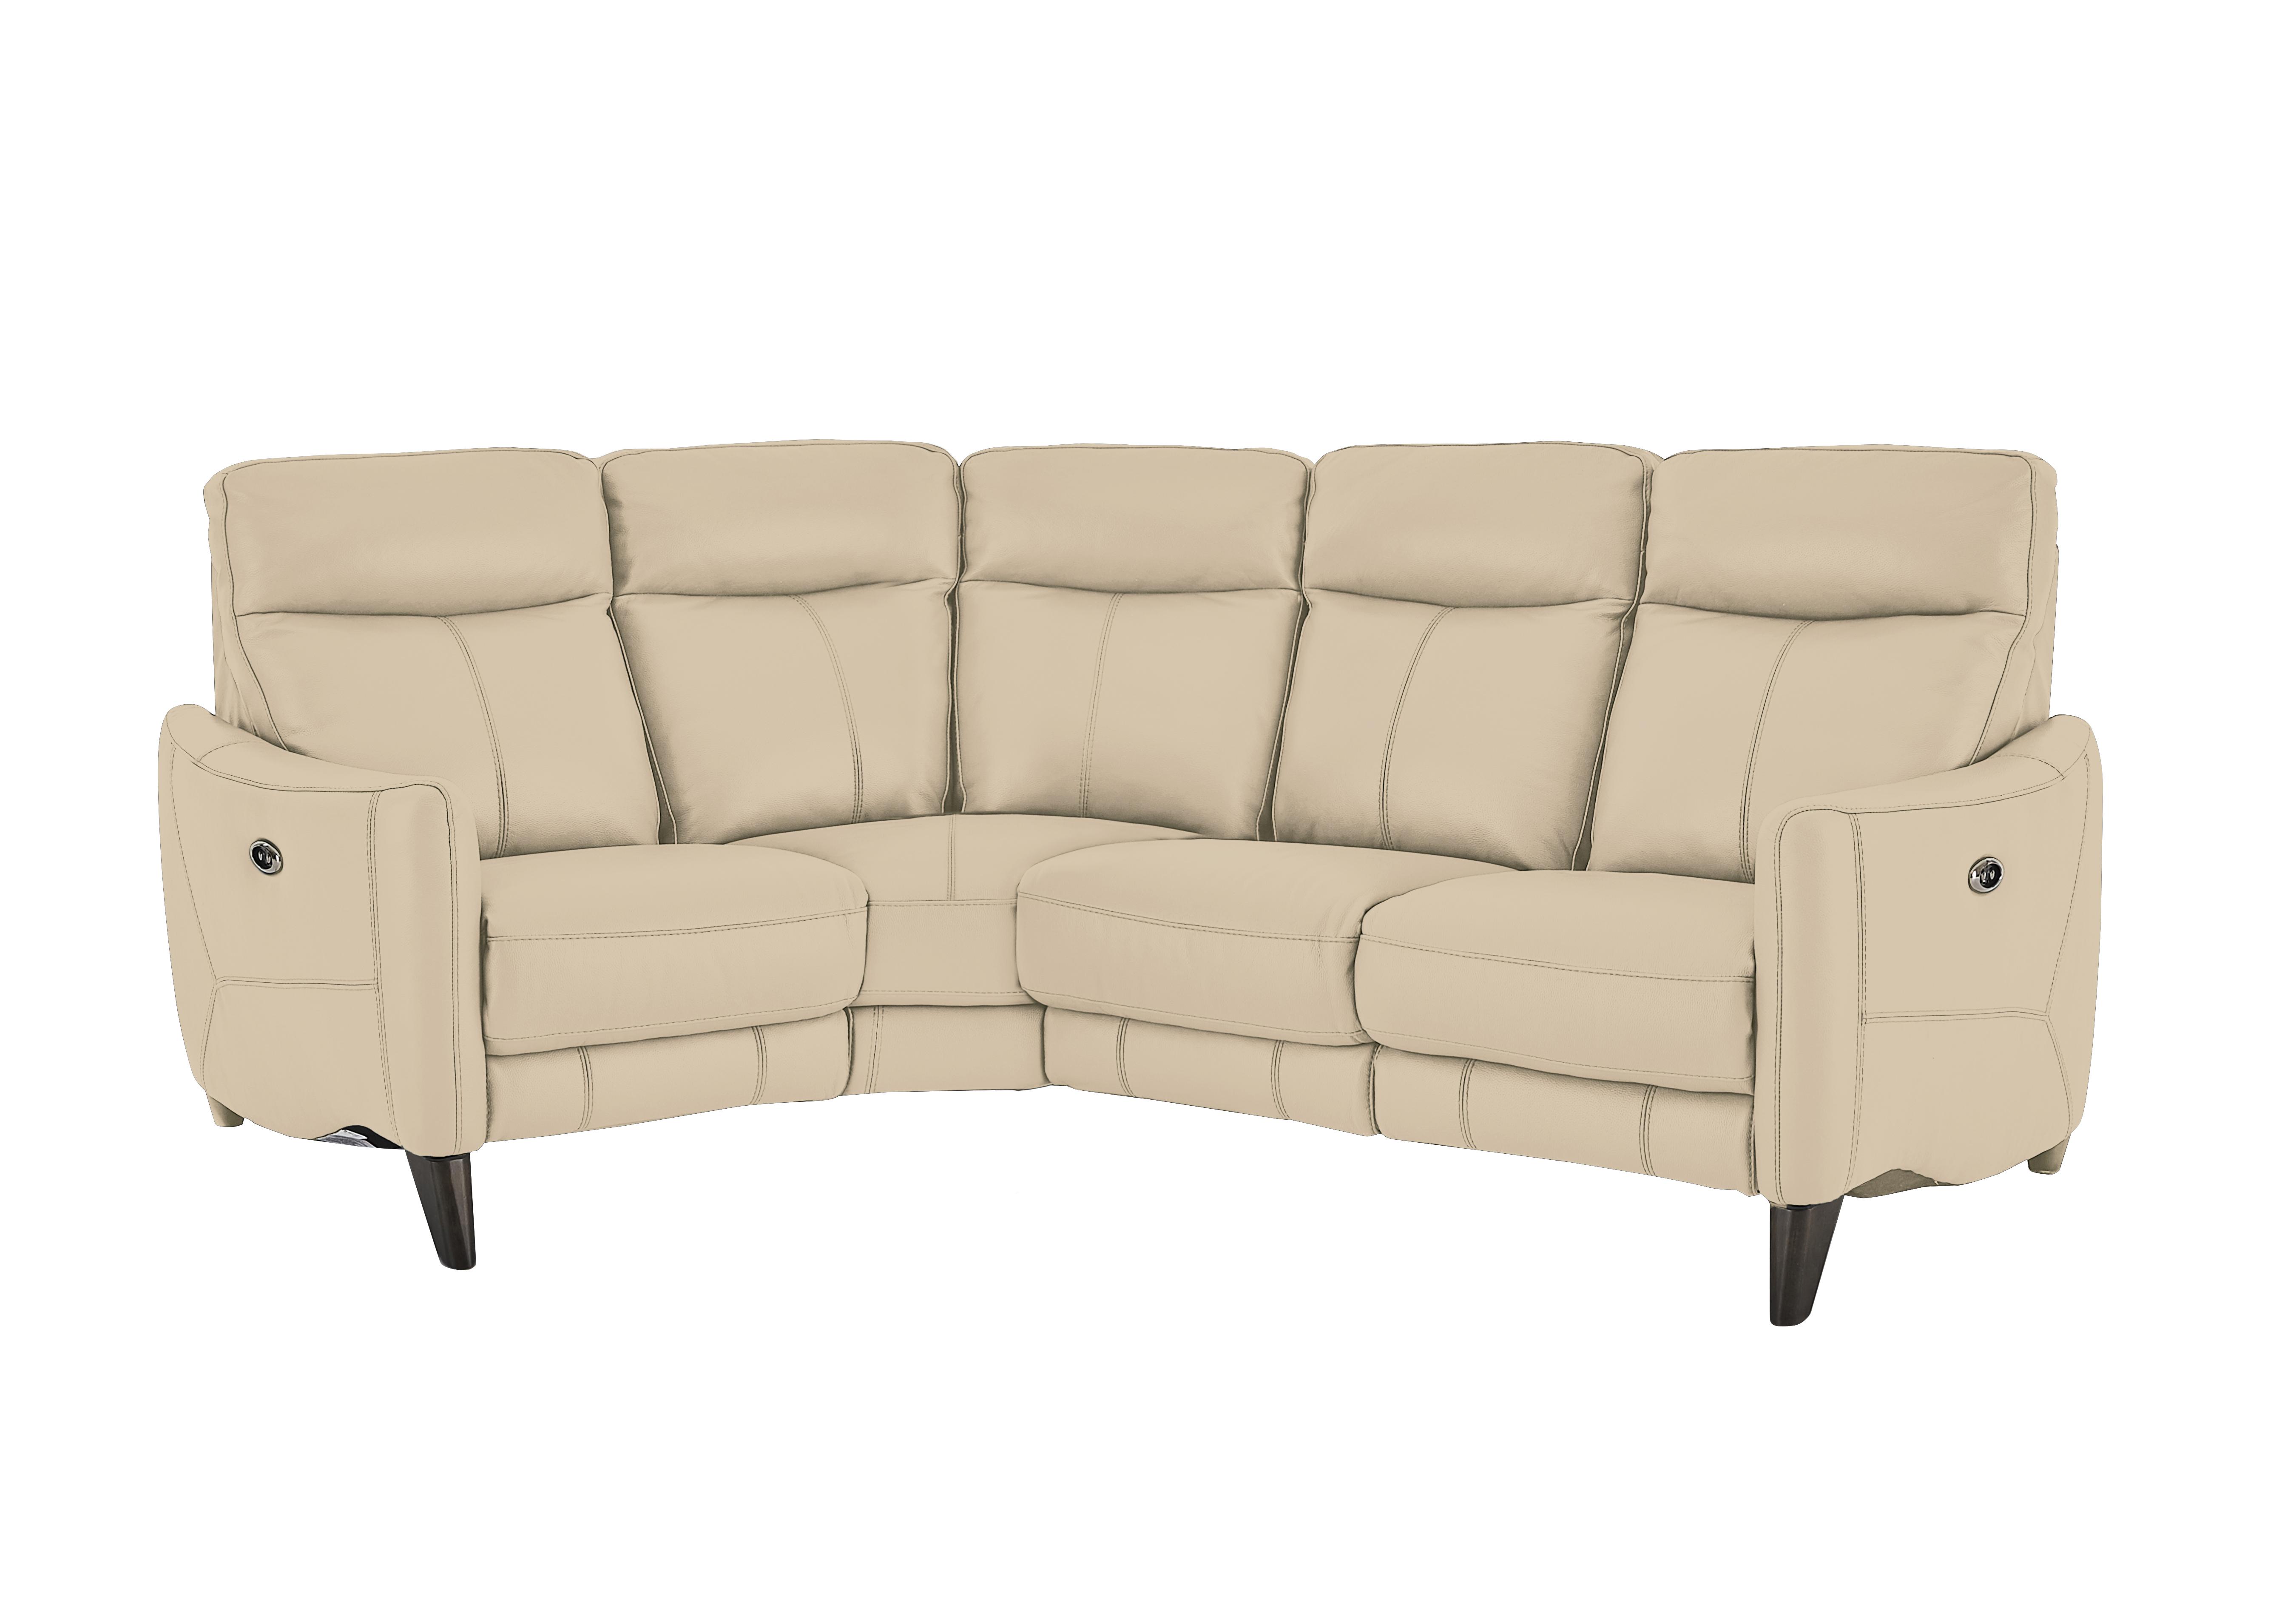 Compact Collection Petit Leather Corner Sofa in Bv-862c Bisque on Furniture Village